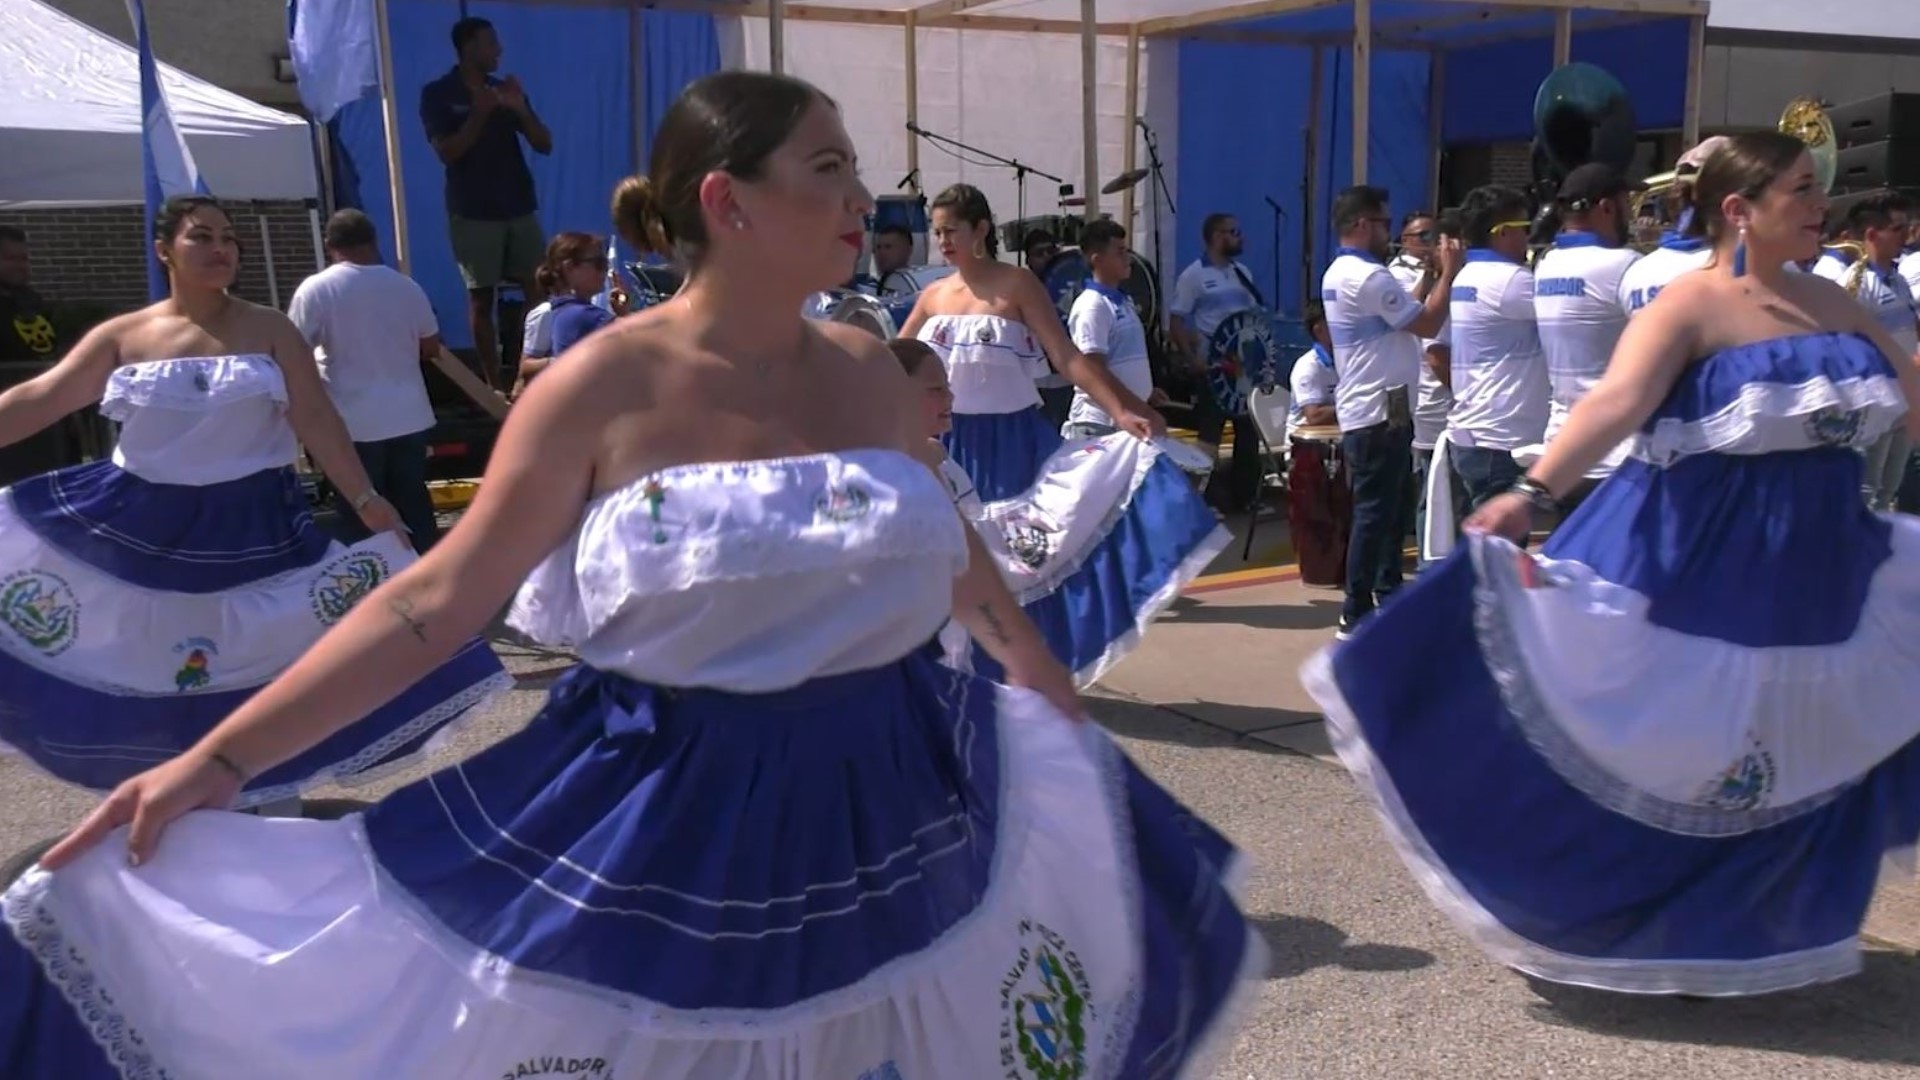 The parade celebrated Mexico's Independence Day on Sept. 16 and El Salvador's on Sept. 15.